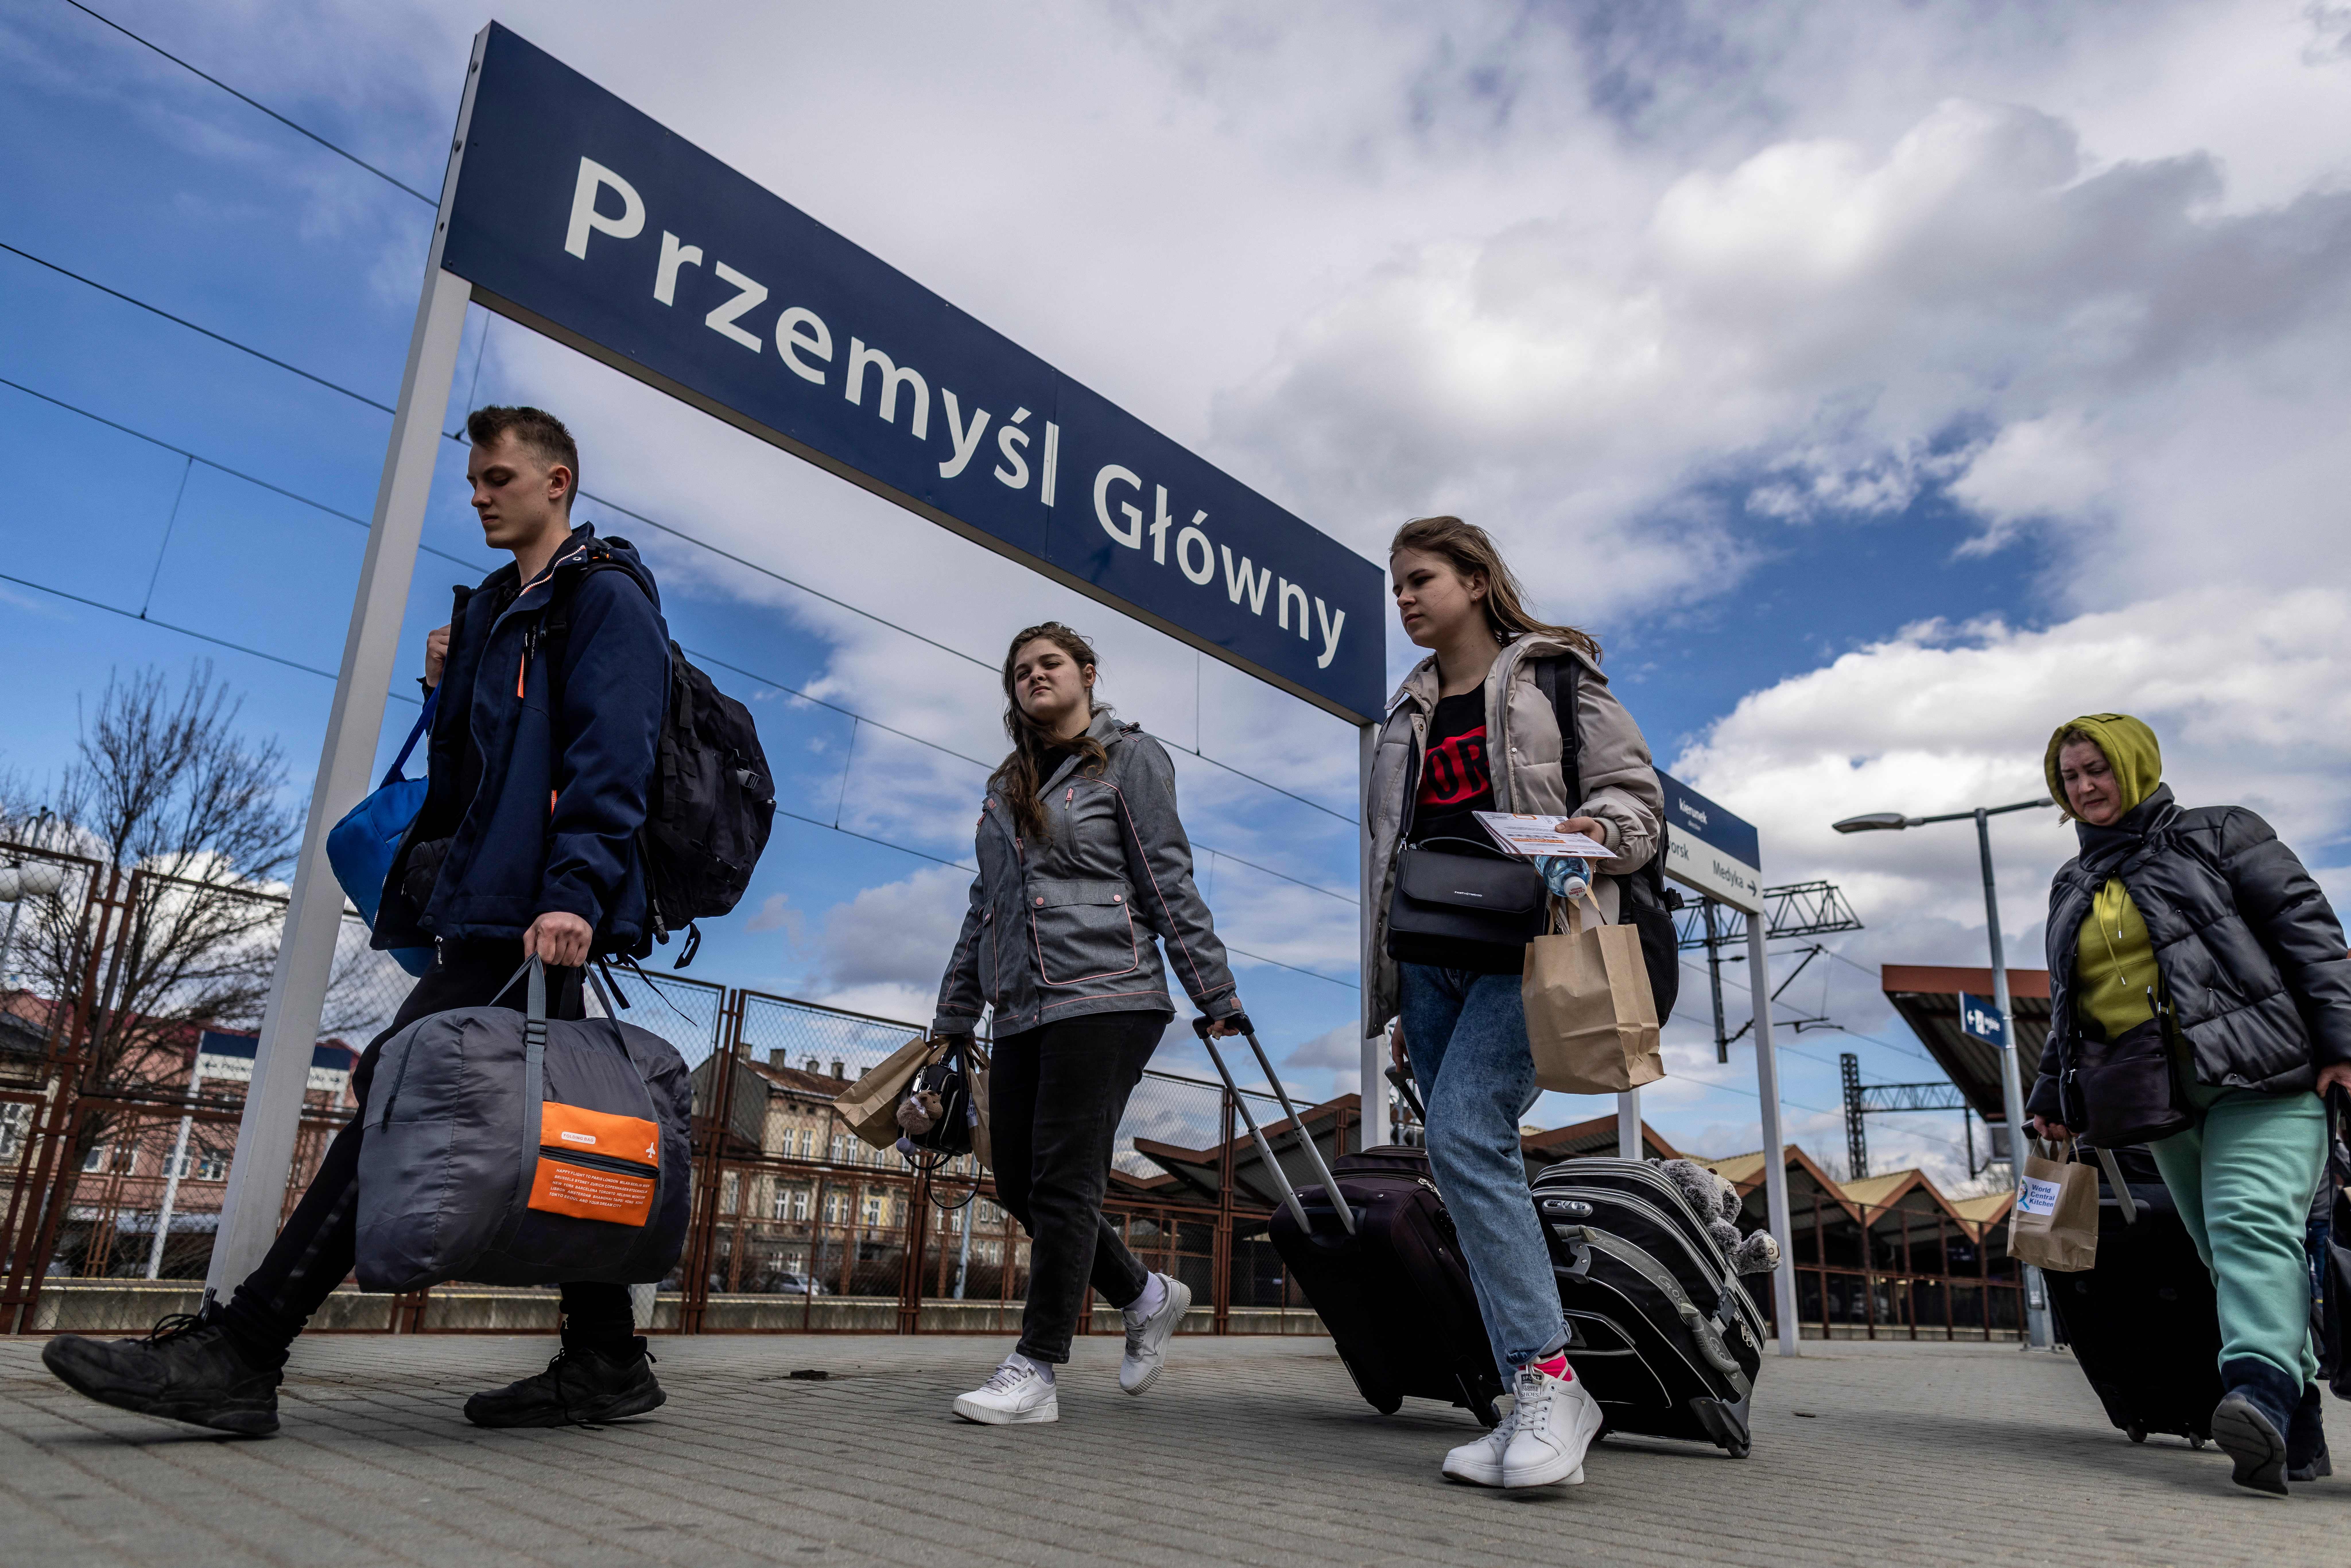 Refugees from Ukraine arriving at the railway station in Przemysl, southeastern Poland, on April 6.